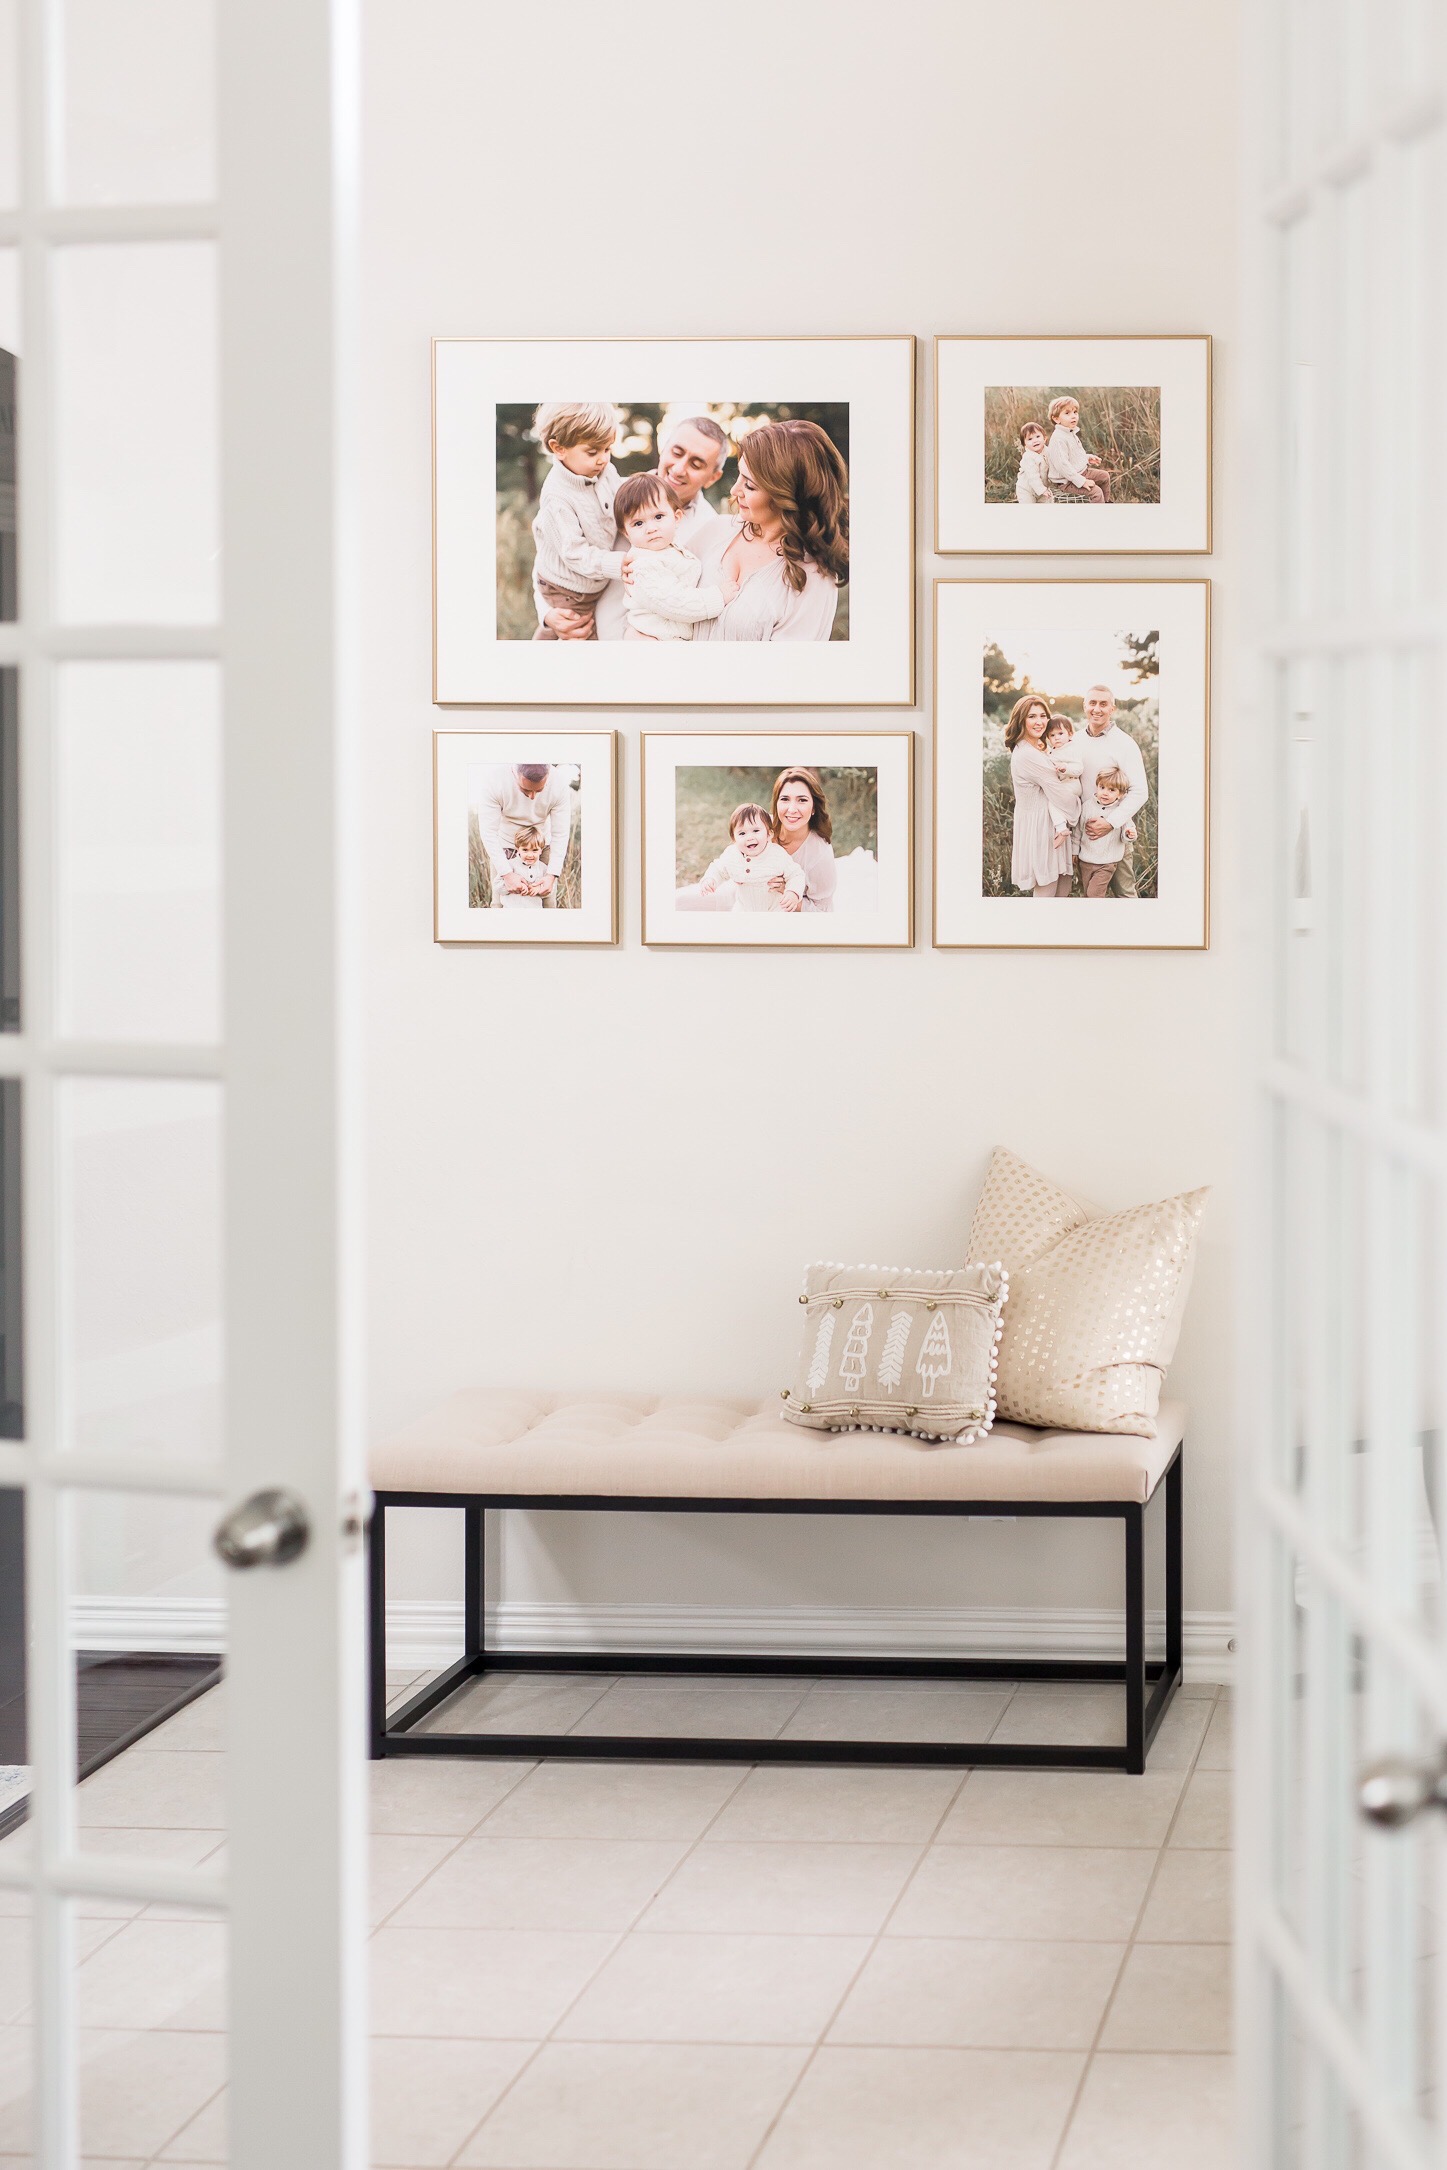 Entry way gallery wall design for family photos